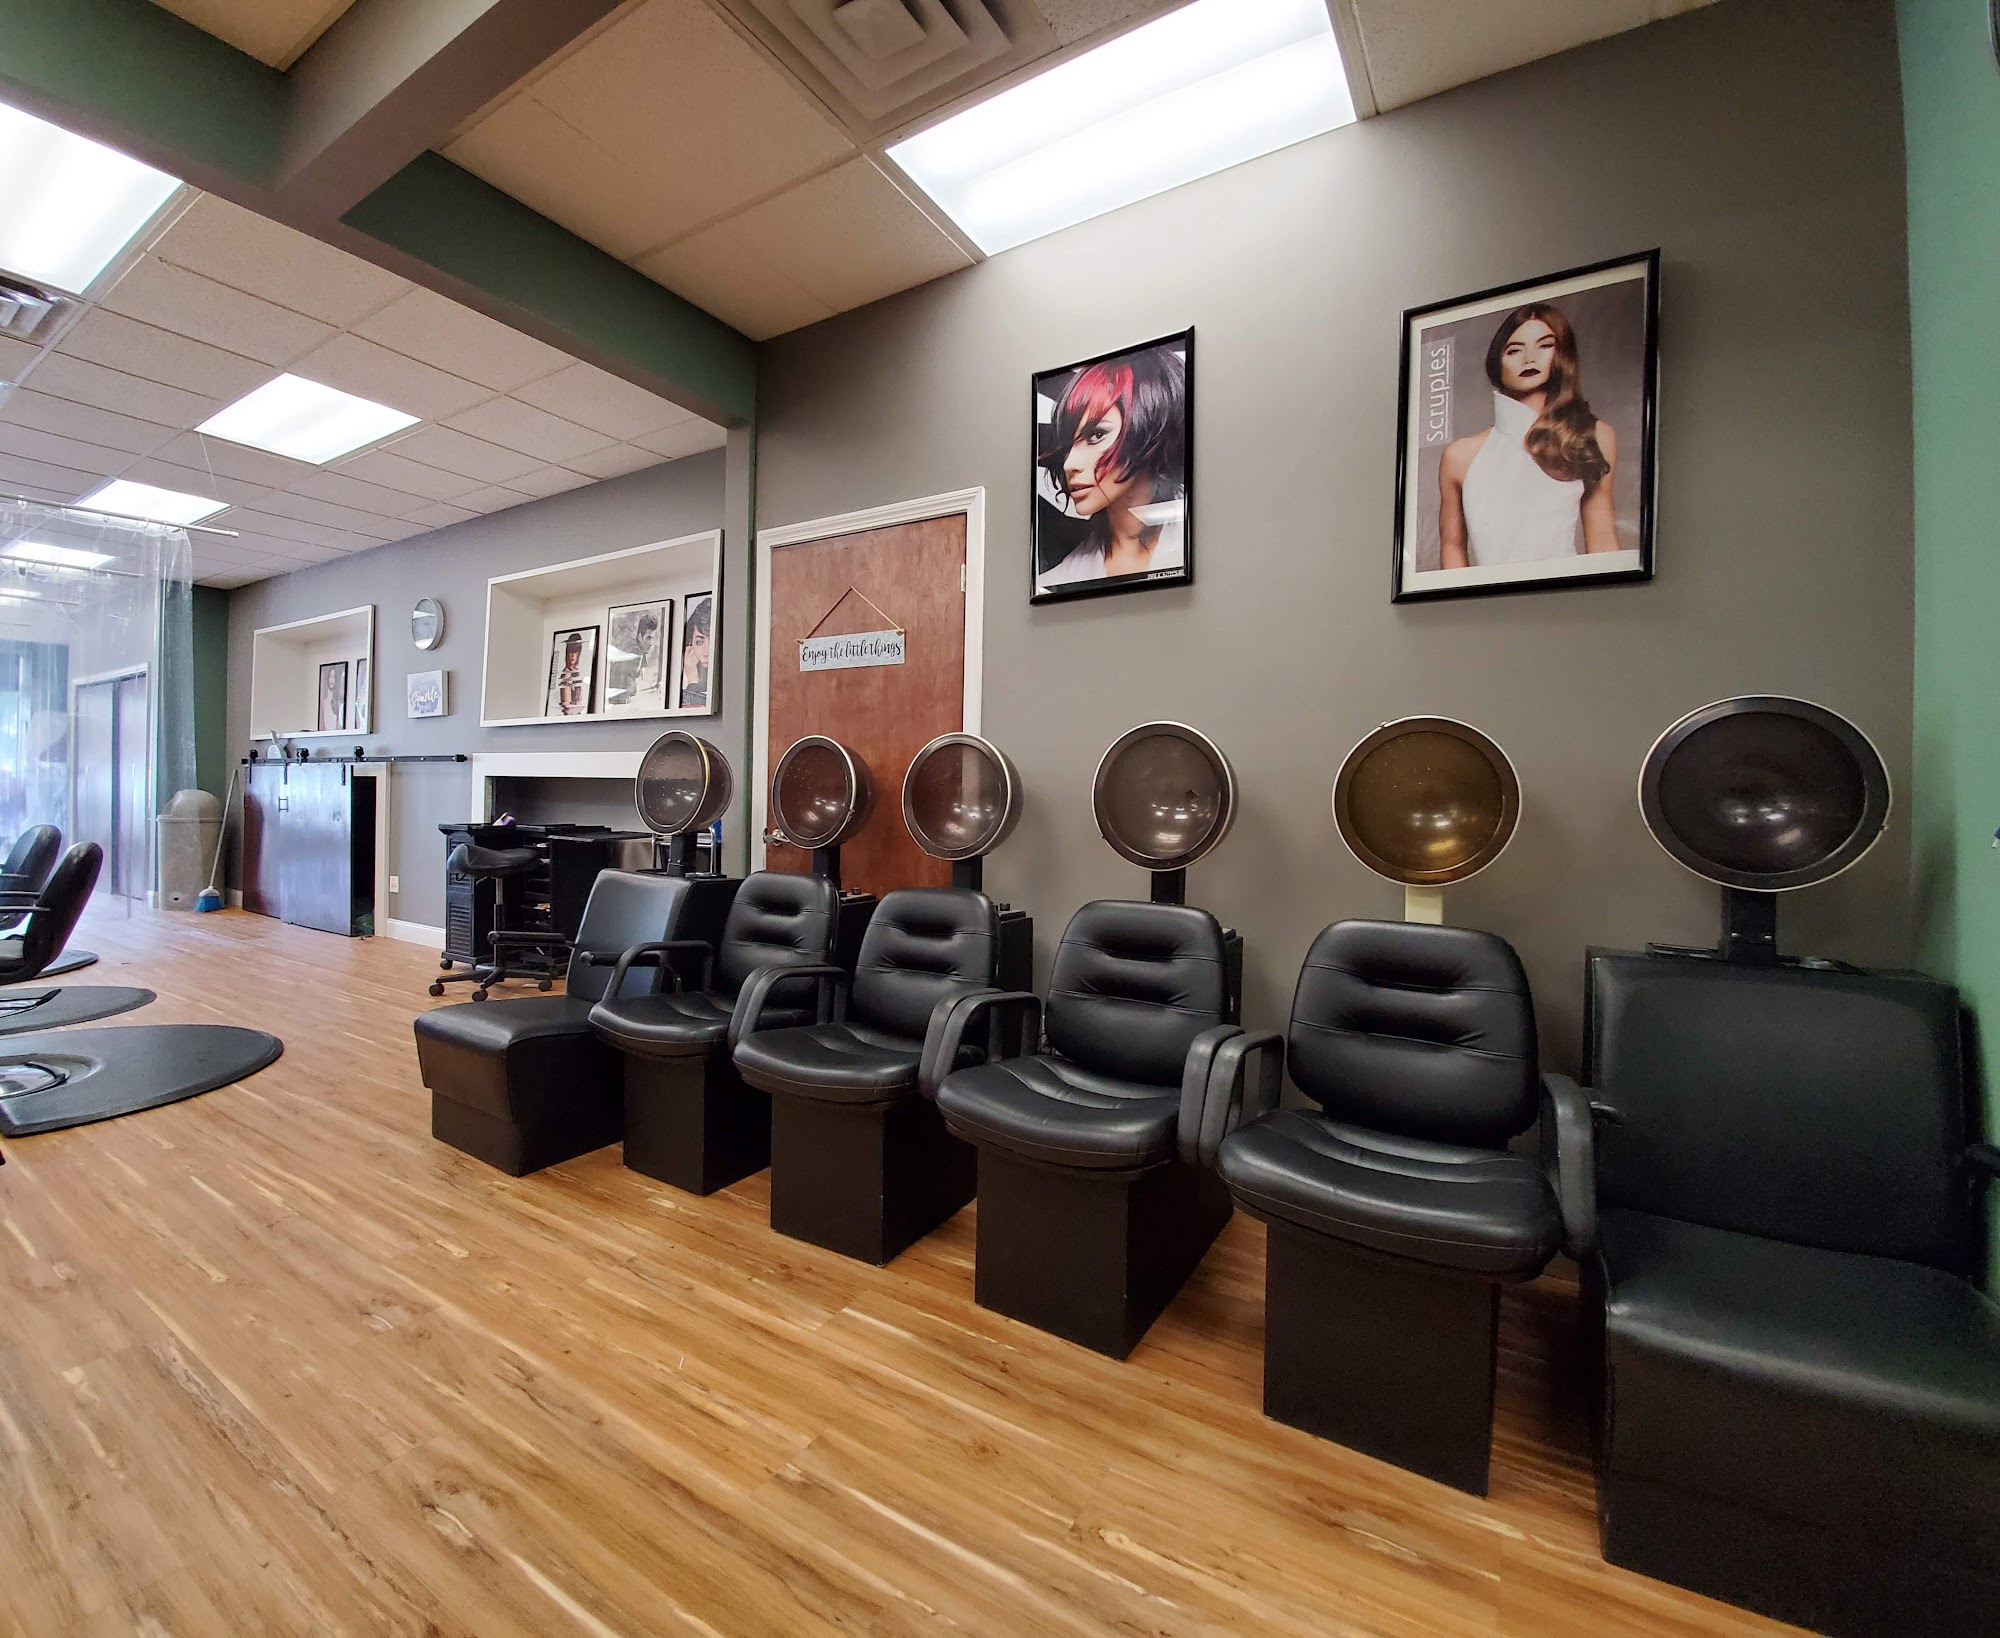 All In One Hair Salon 234 Jericho Turnpike, Floral Park New York 11001